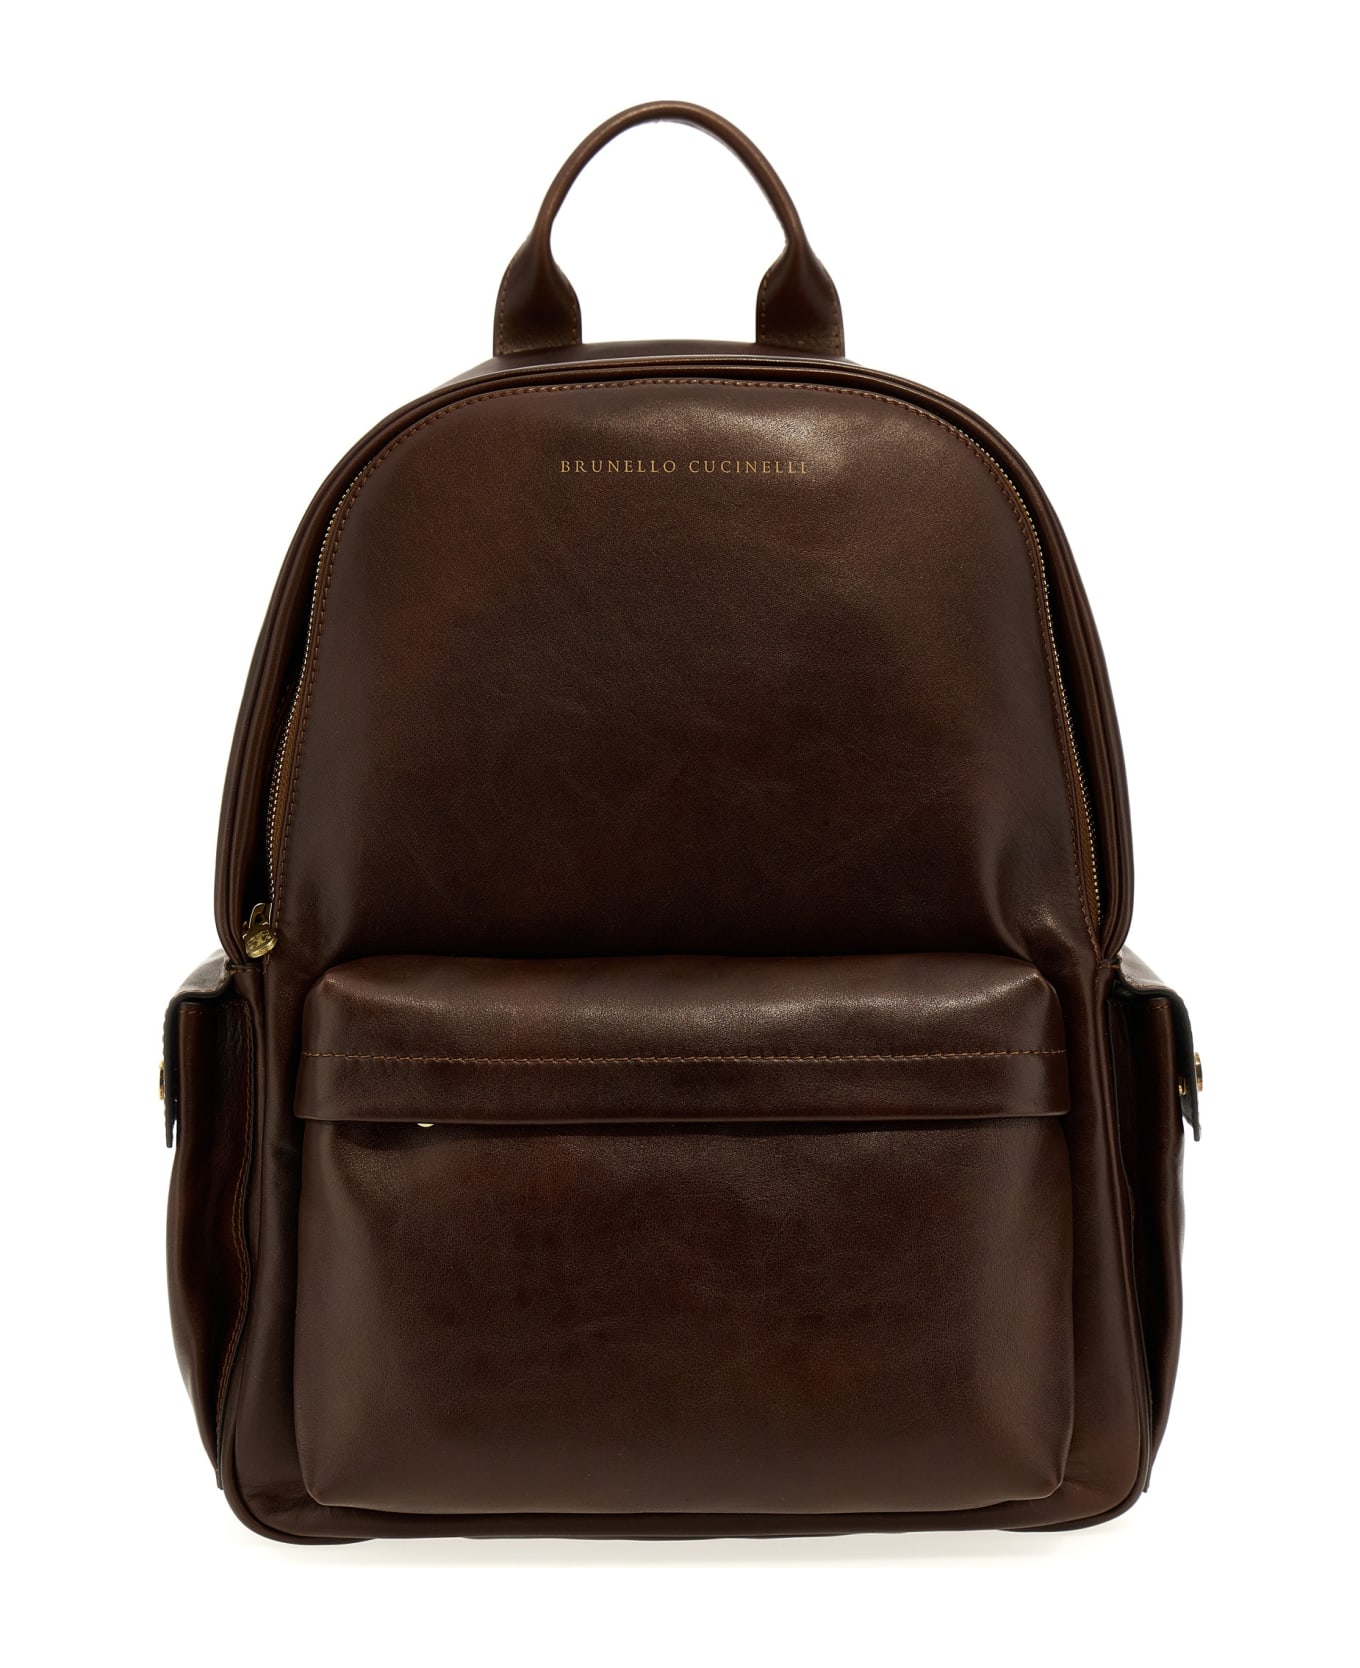 Brunello Cucinelli Leather Backpack - Brown バックパック